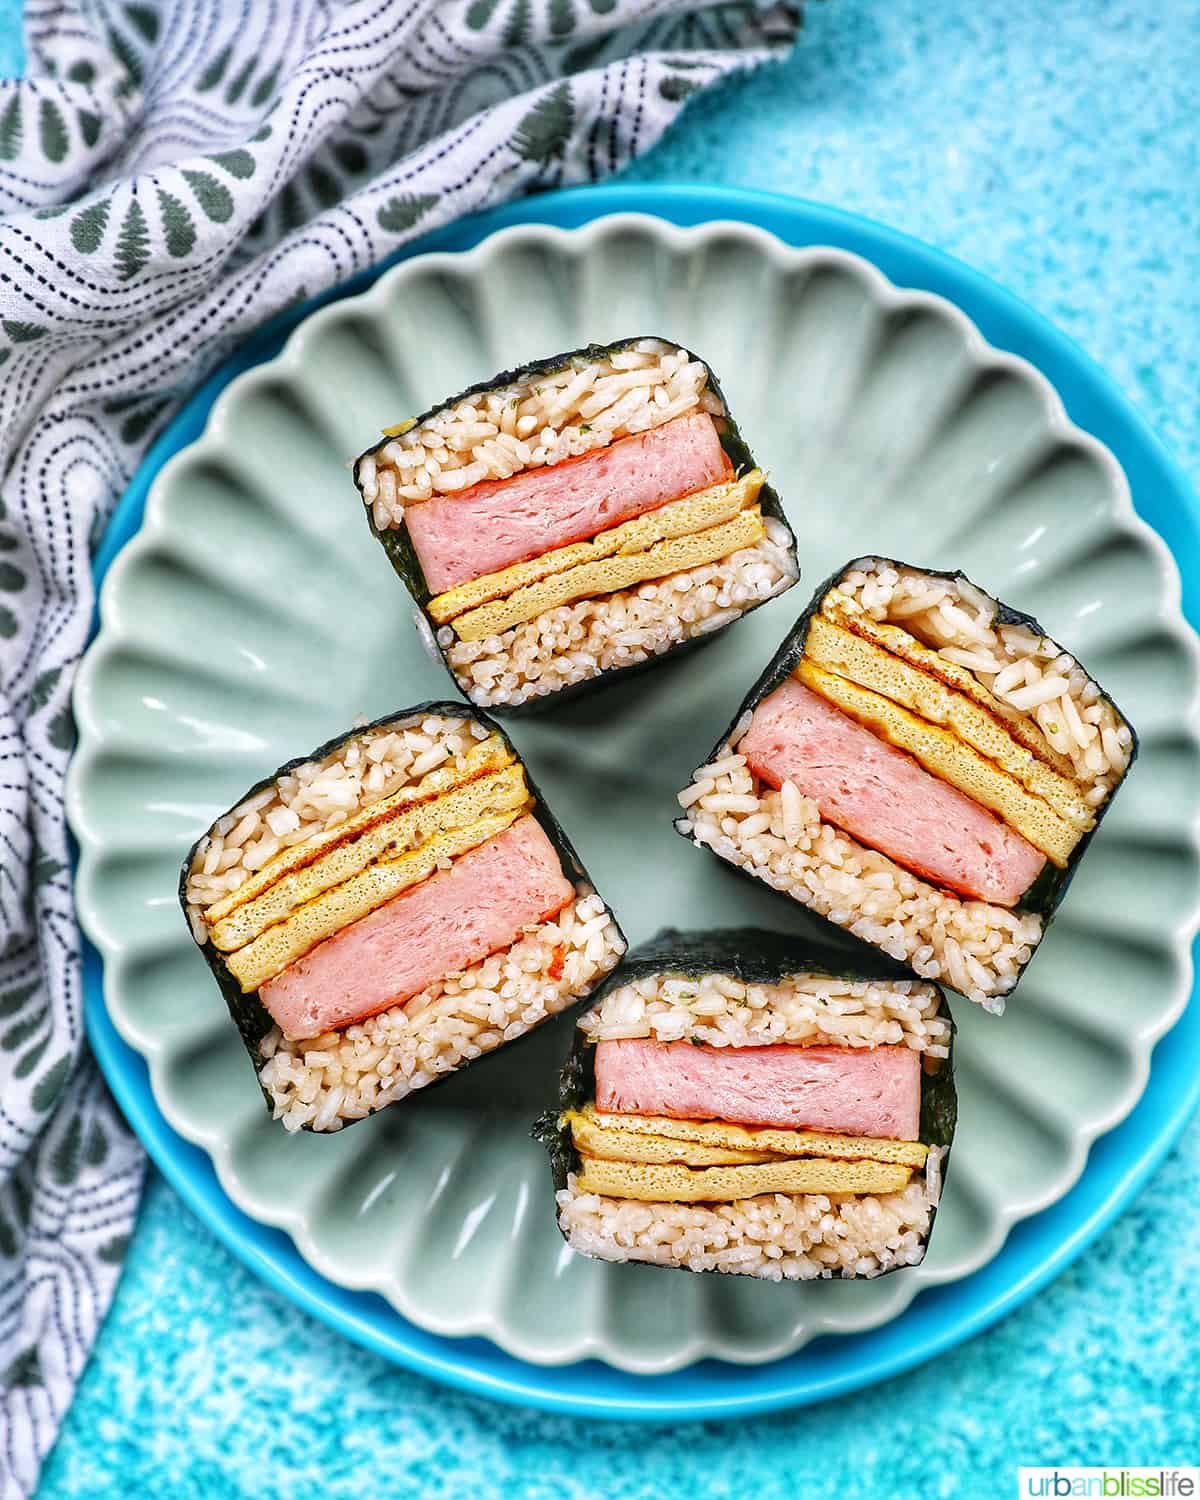 Tropical Theme Party Main Course Ideas - Spam Musubi with Egg